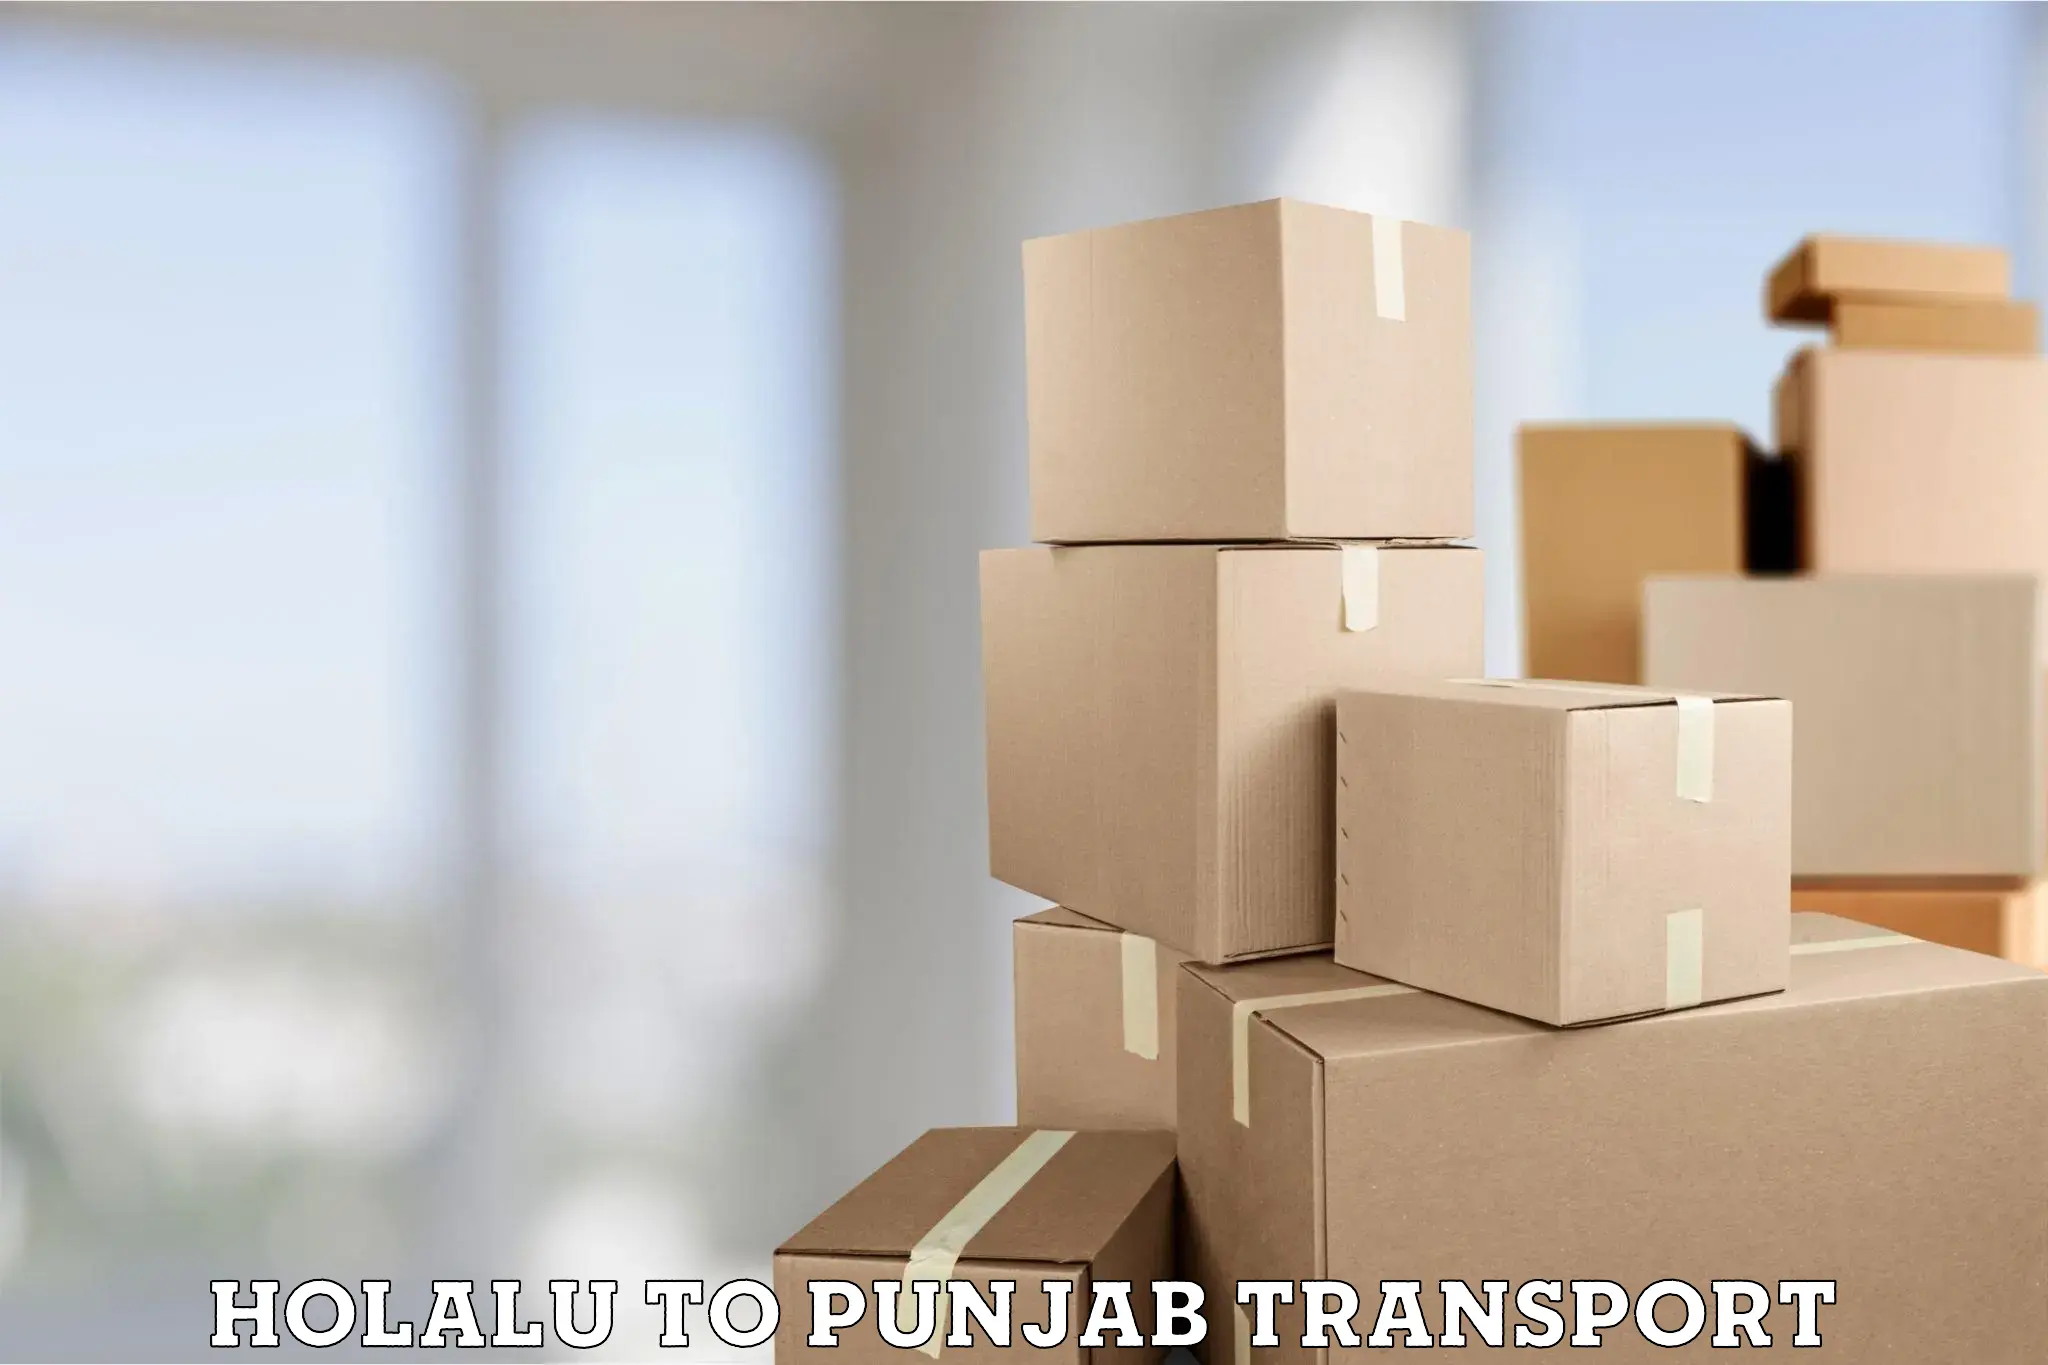 Transport bike from one state to another Holalu to Punjab